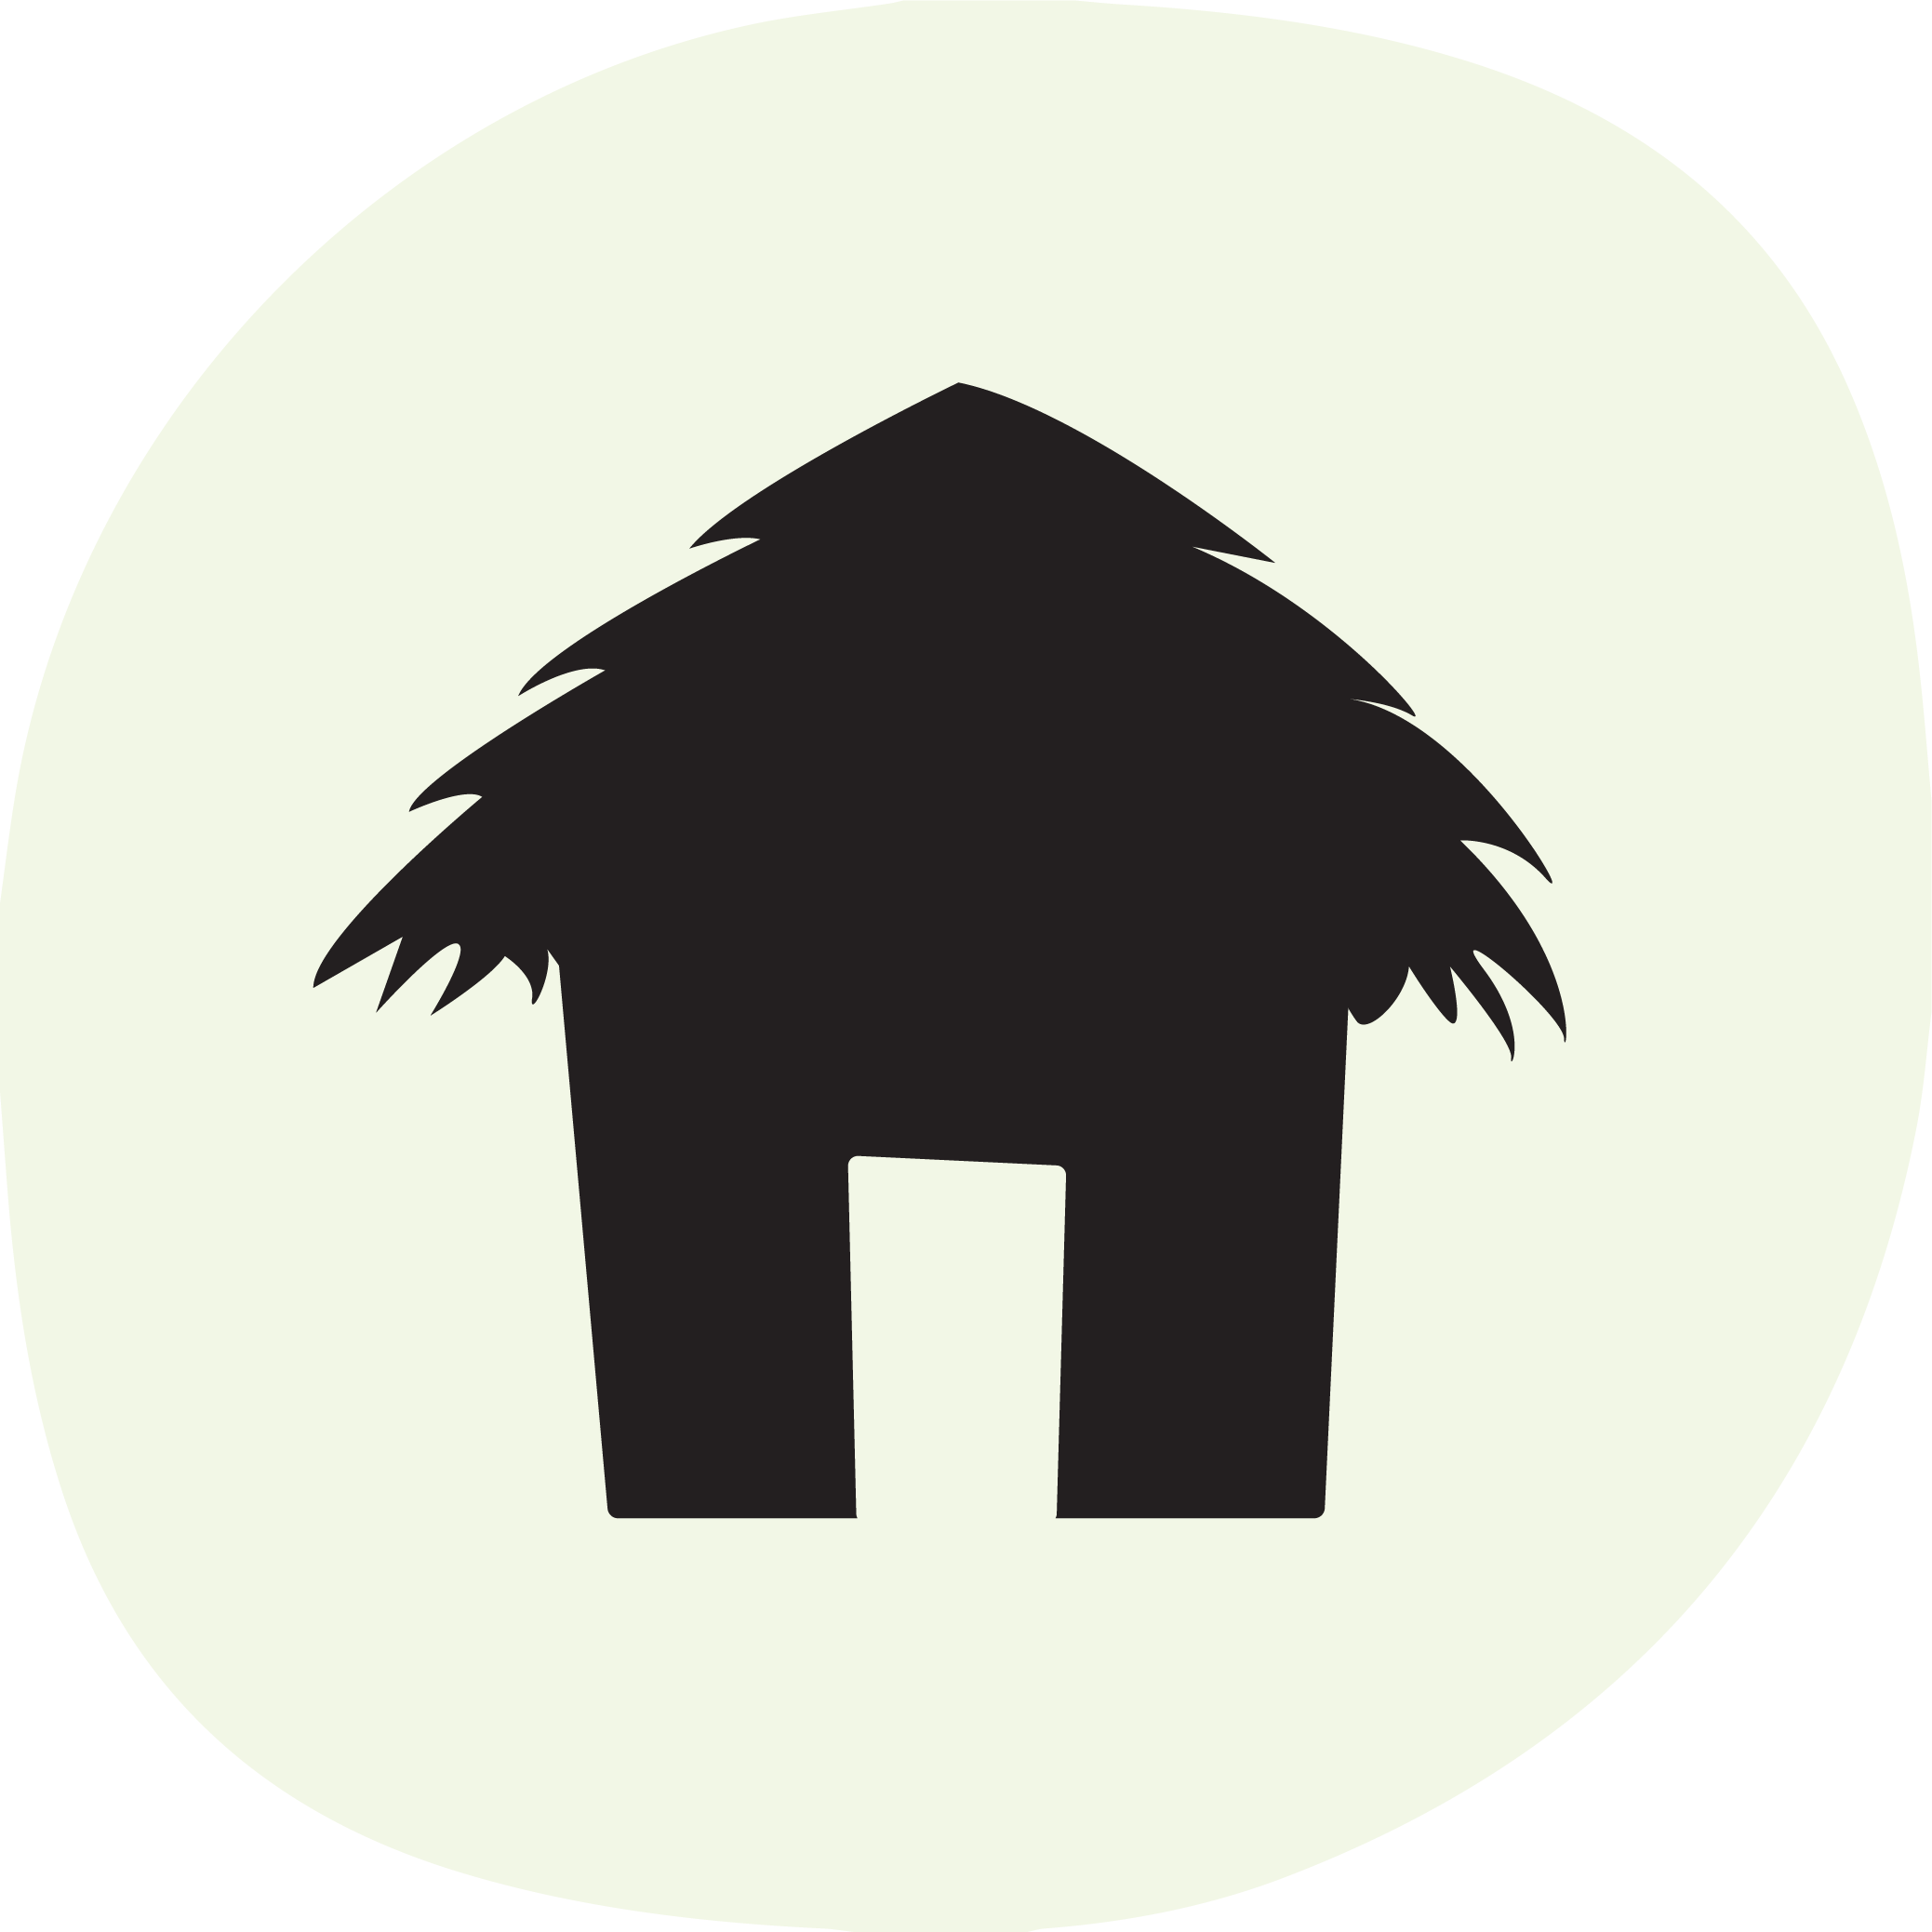 house icon with transparent green